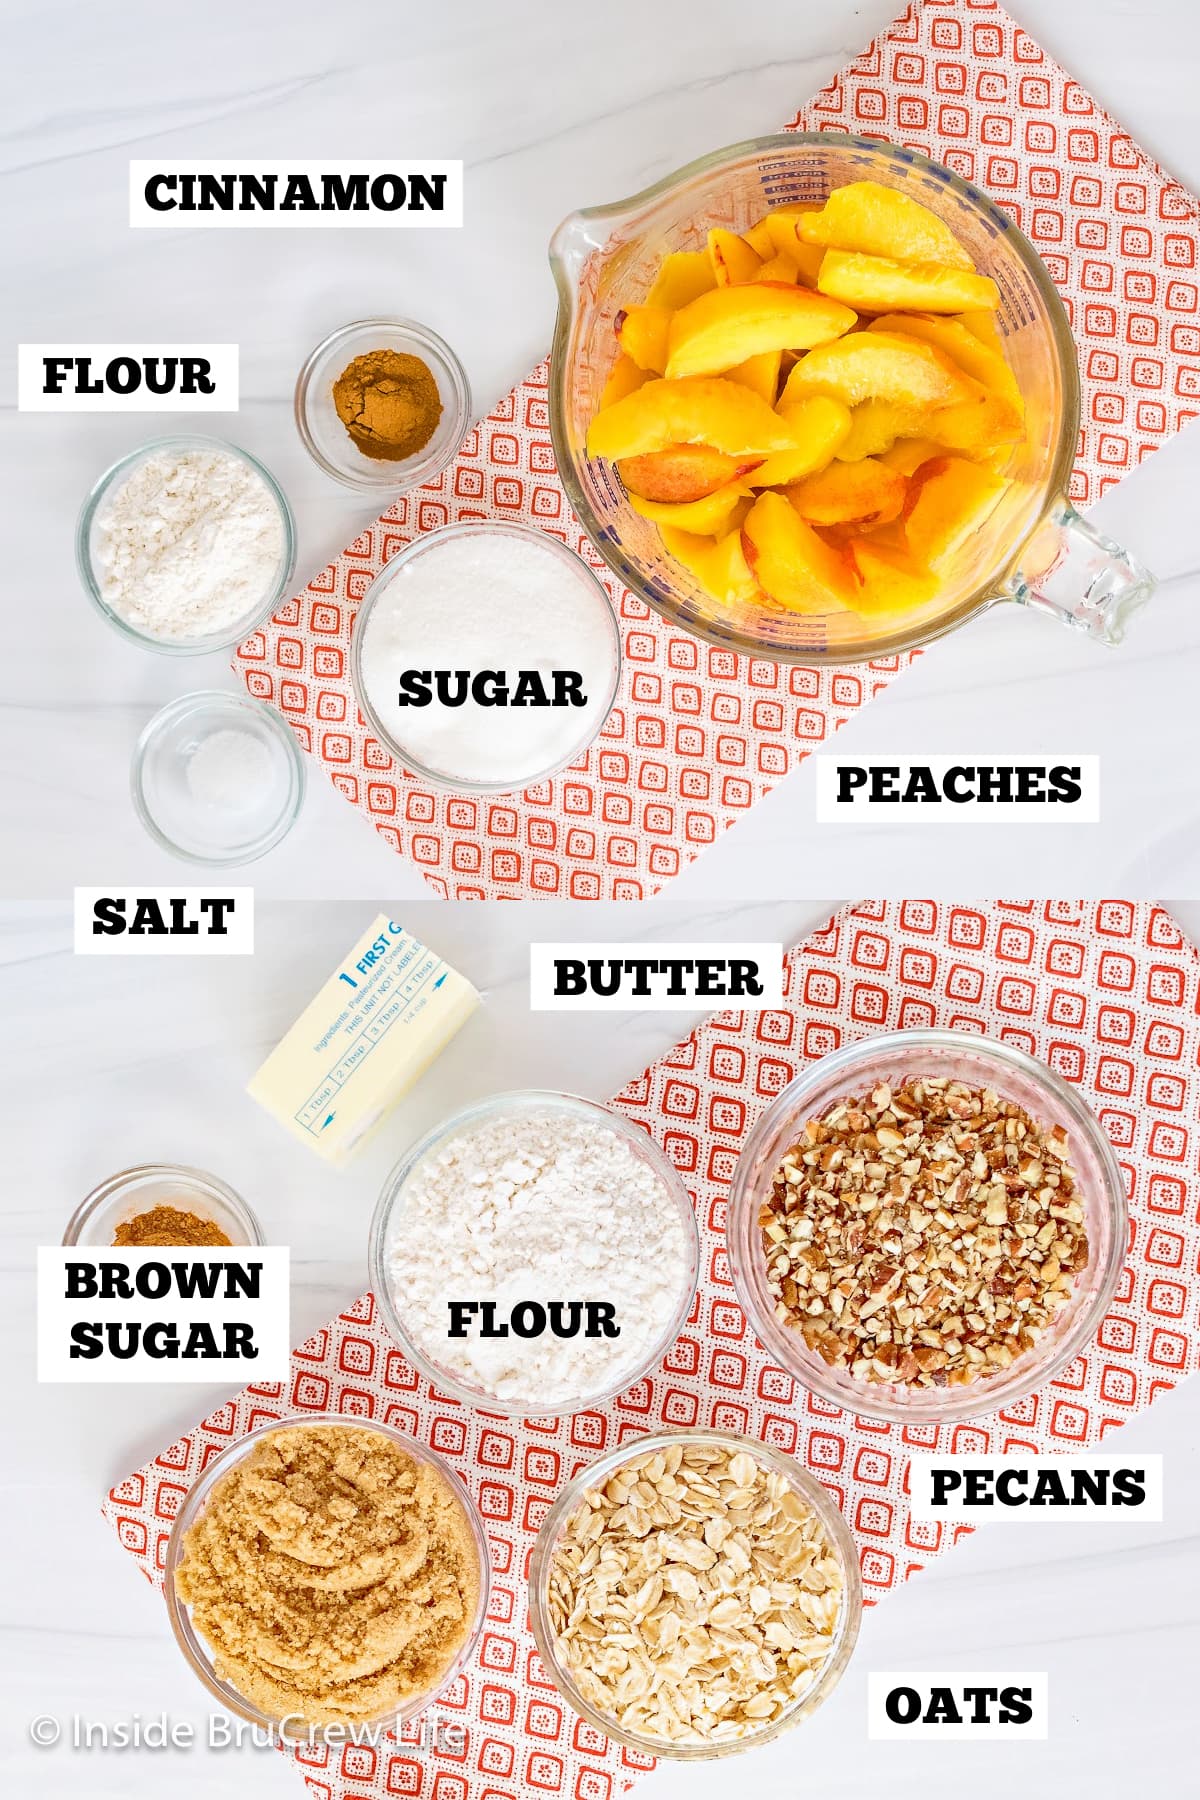 Bowls of ingredients needed to make a fruit bake.